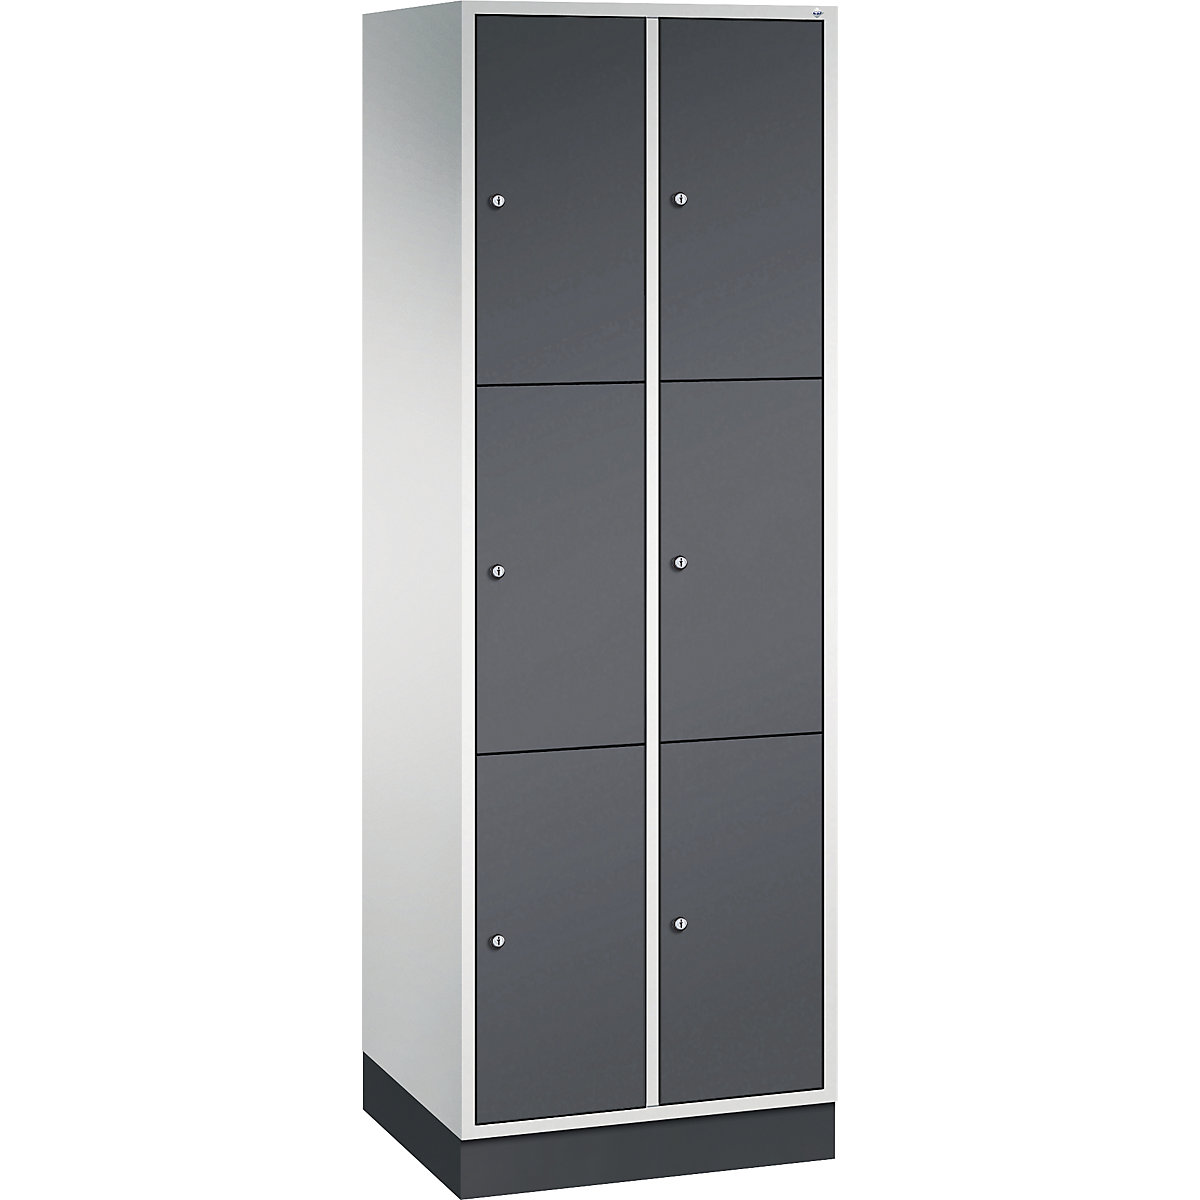 INTRO steel compartment locker, compartment height 580 mm – C+P, WxD 620 x 500 mm, 6 compartments, light grey body, black grey doors